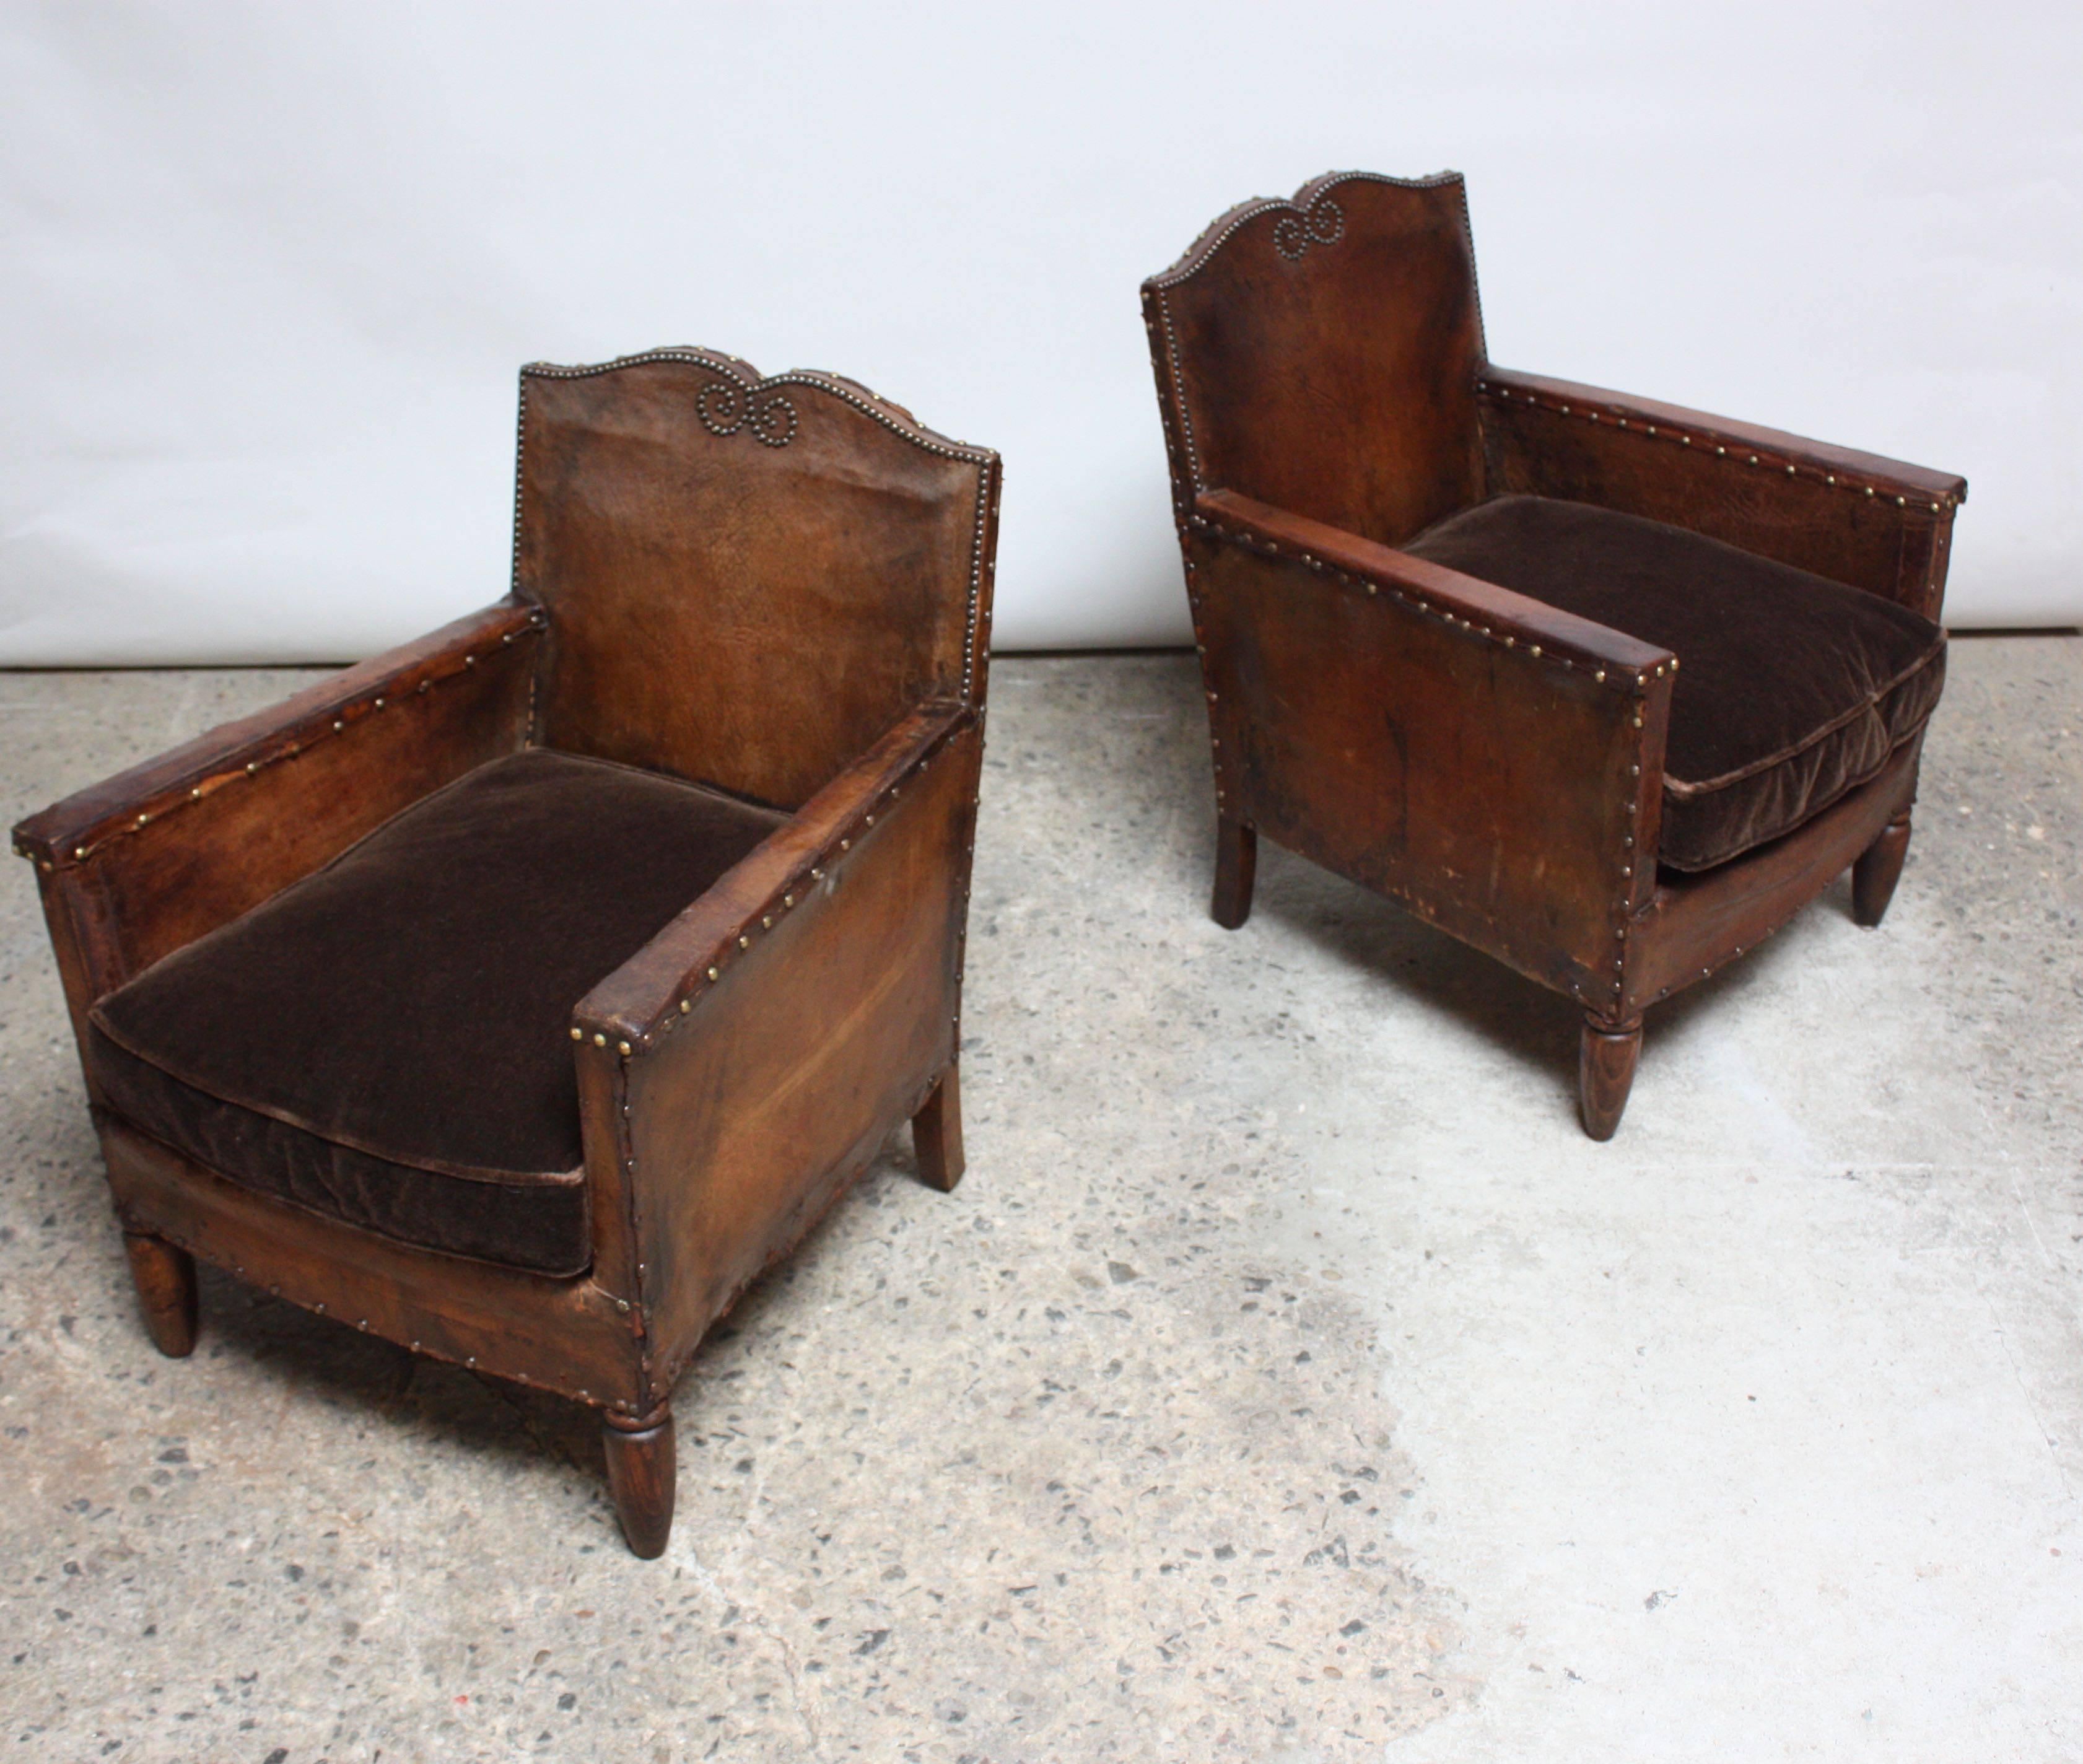 These small club chairs were designed in France between the mid-1920s through the early 1930s and are composed of leather frames and velvet cushions (an upholstery contrast that was typical for the period). However, the cushions were likely updated